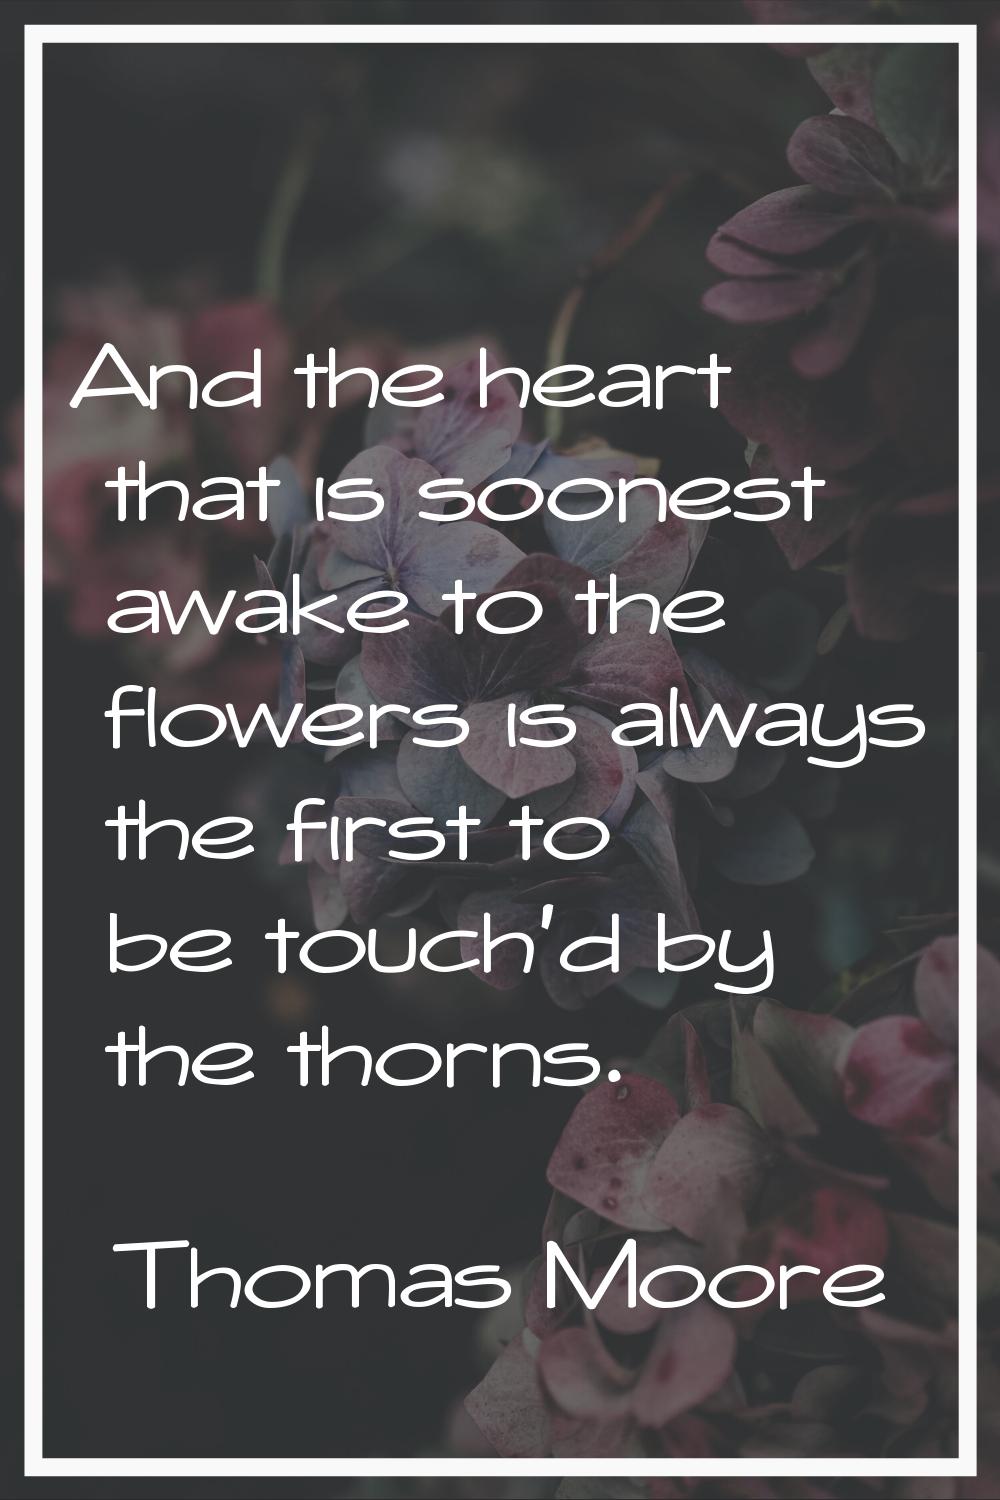 And the heart that is soonest awake to the flowers is always the first to be touch'd by the thorns.